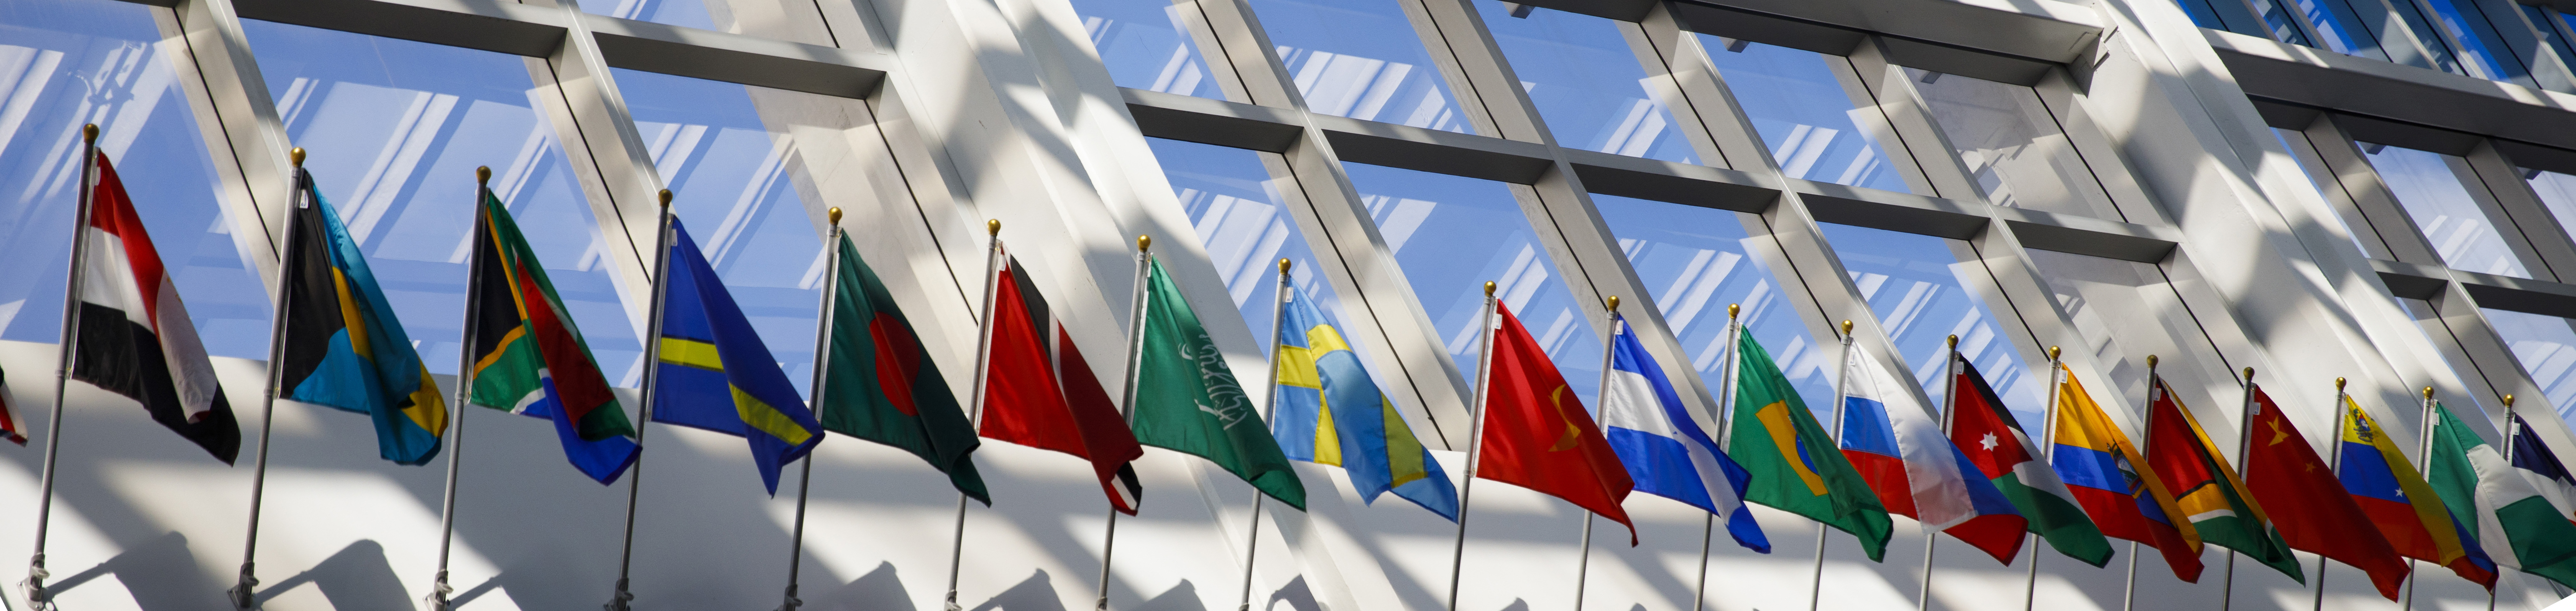 flags from different countries displayed on campus